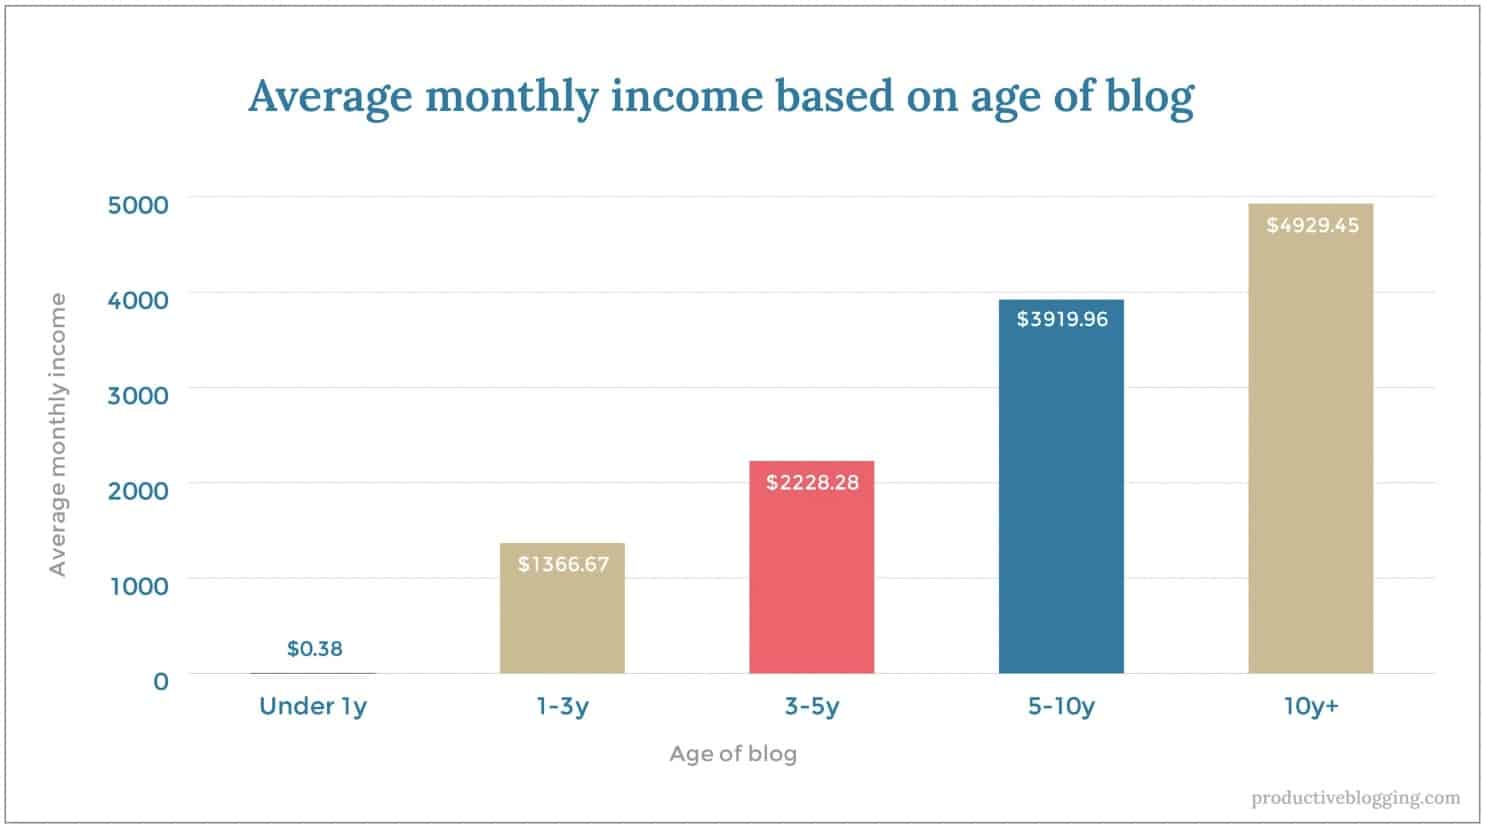 Average monthly income based on age of blog